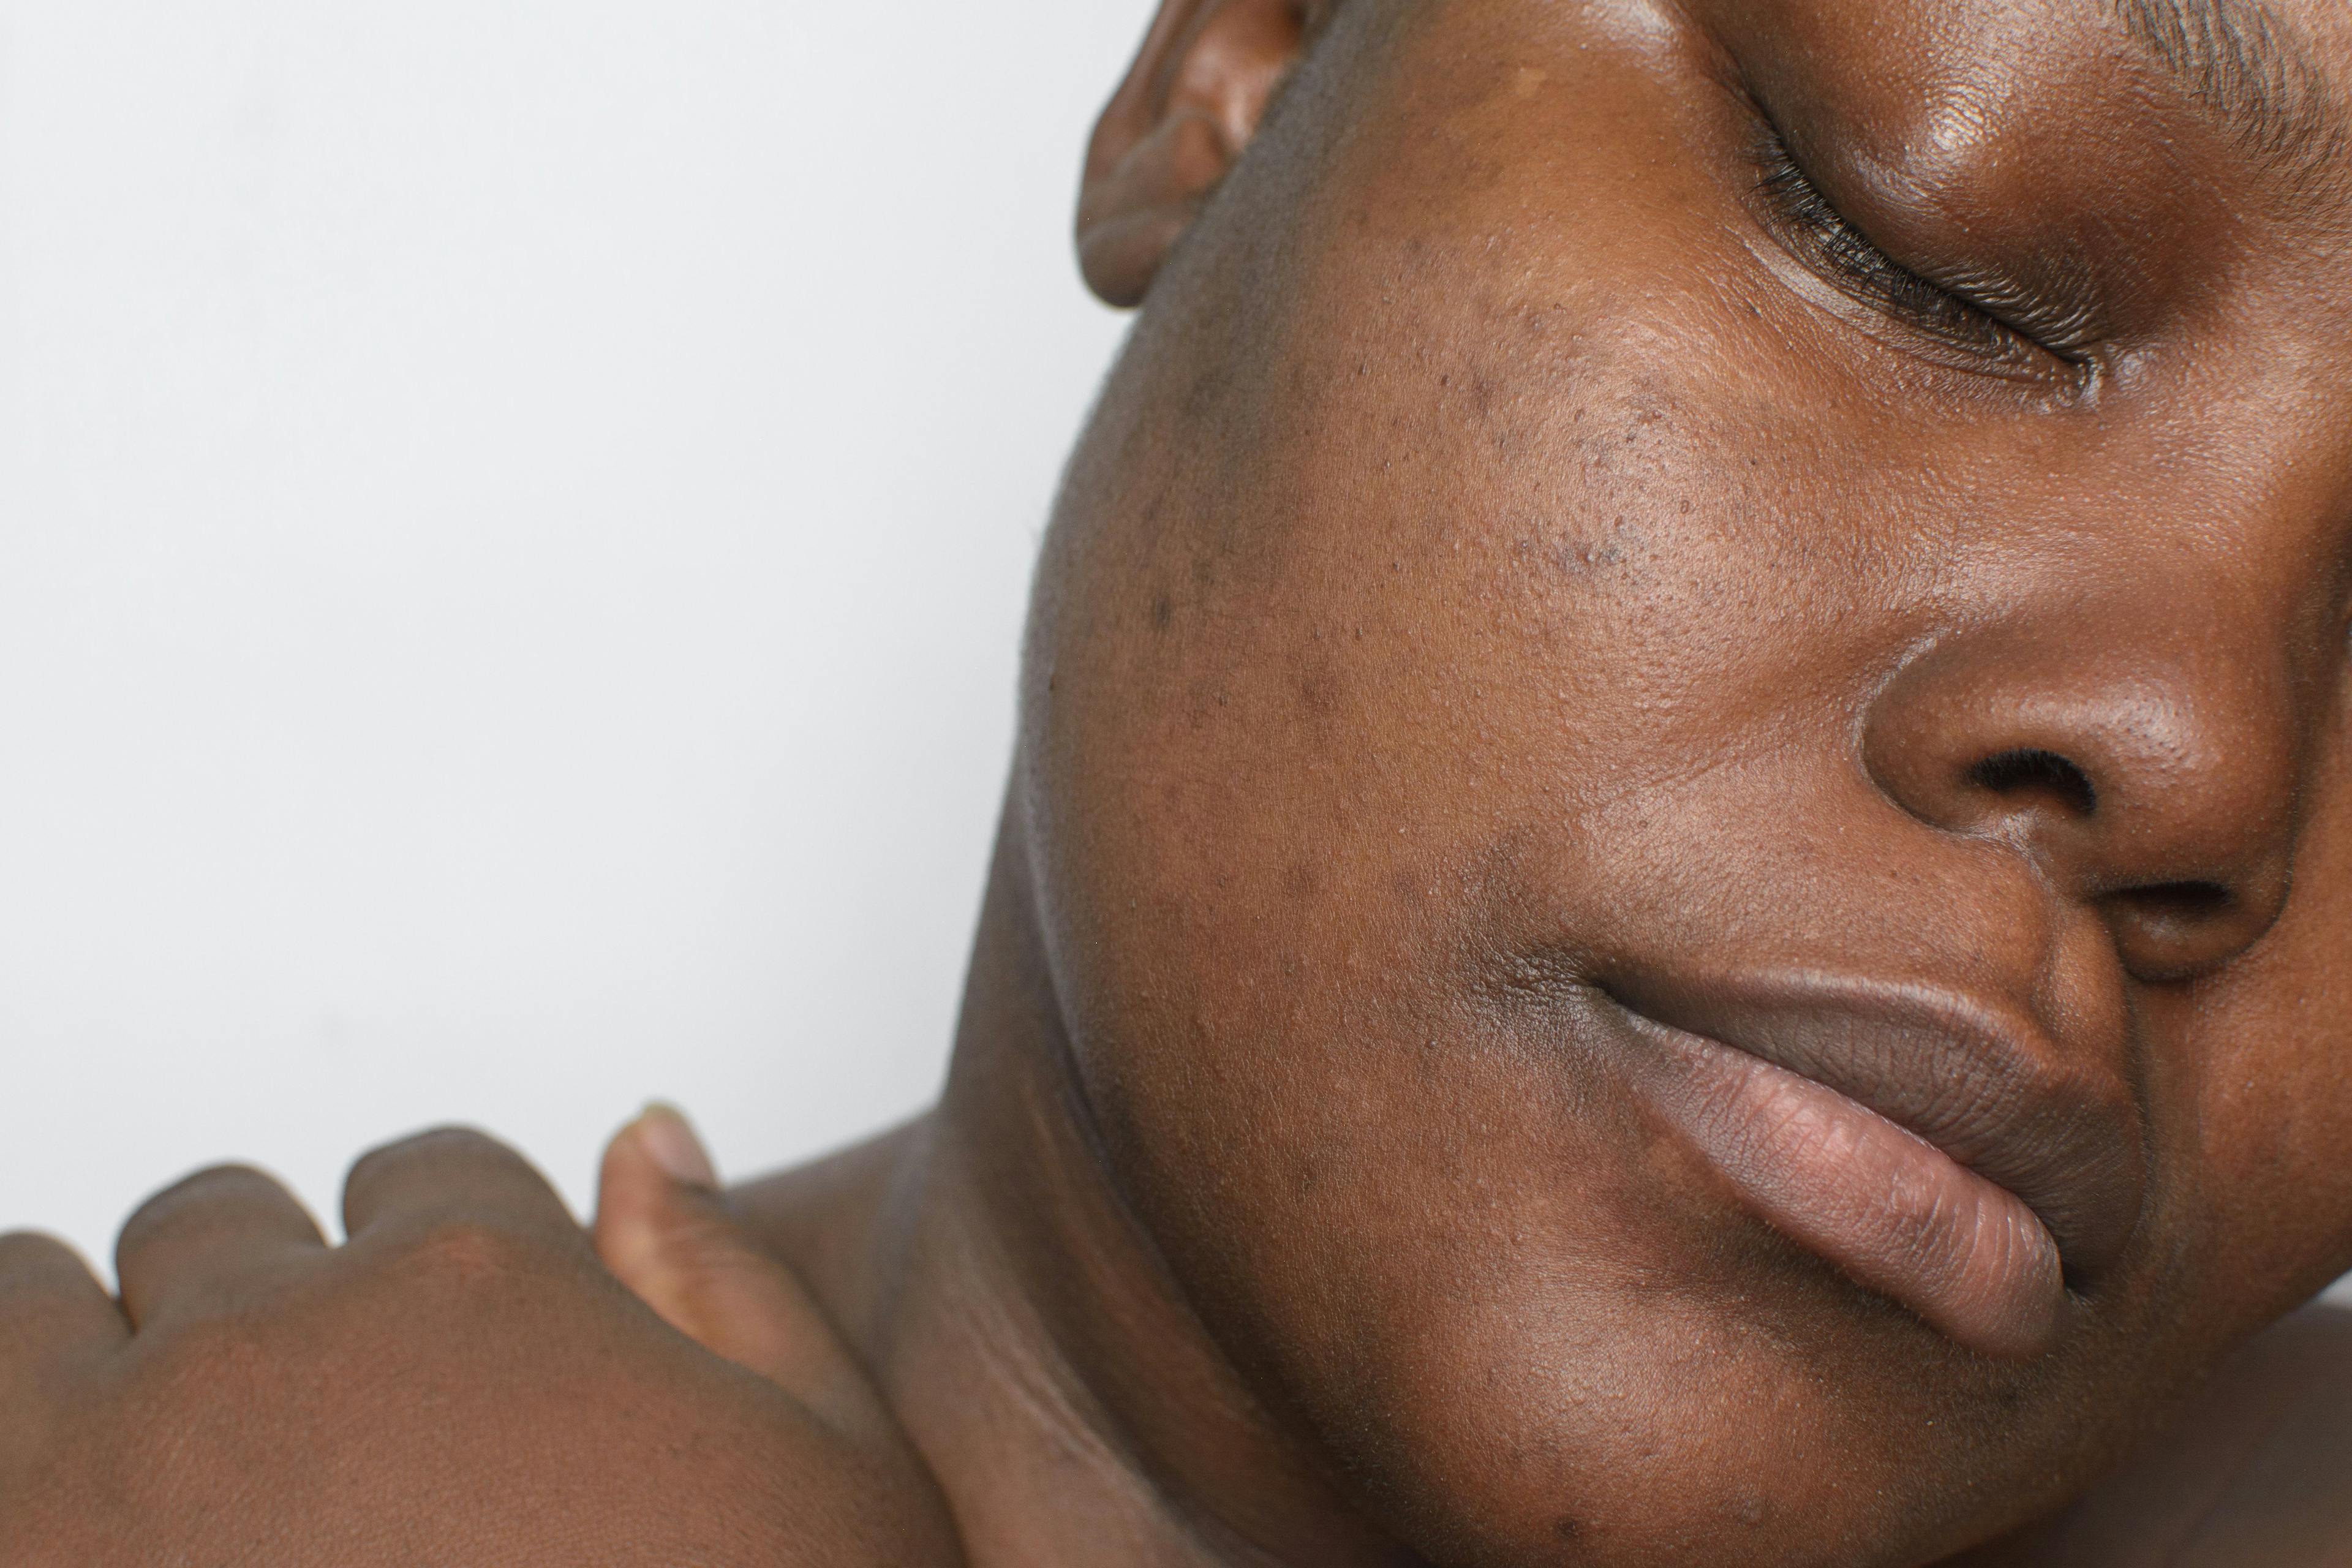 Tazarotene Led to Hyperpigmentation Improvement in Black Patients With Acne